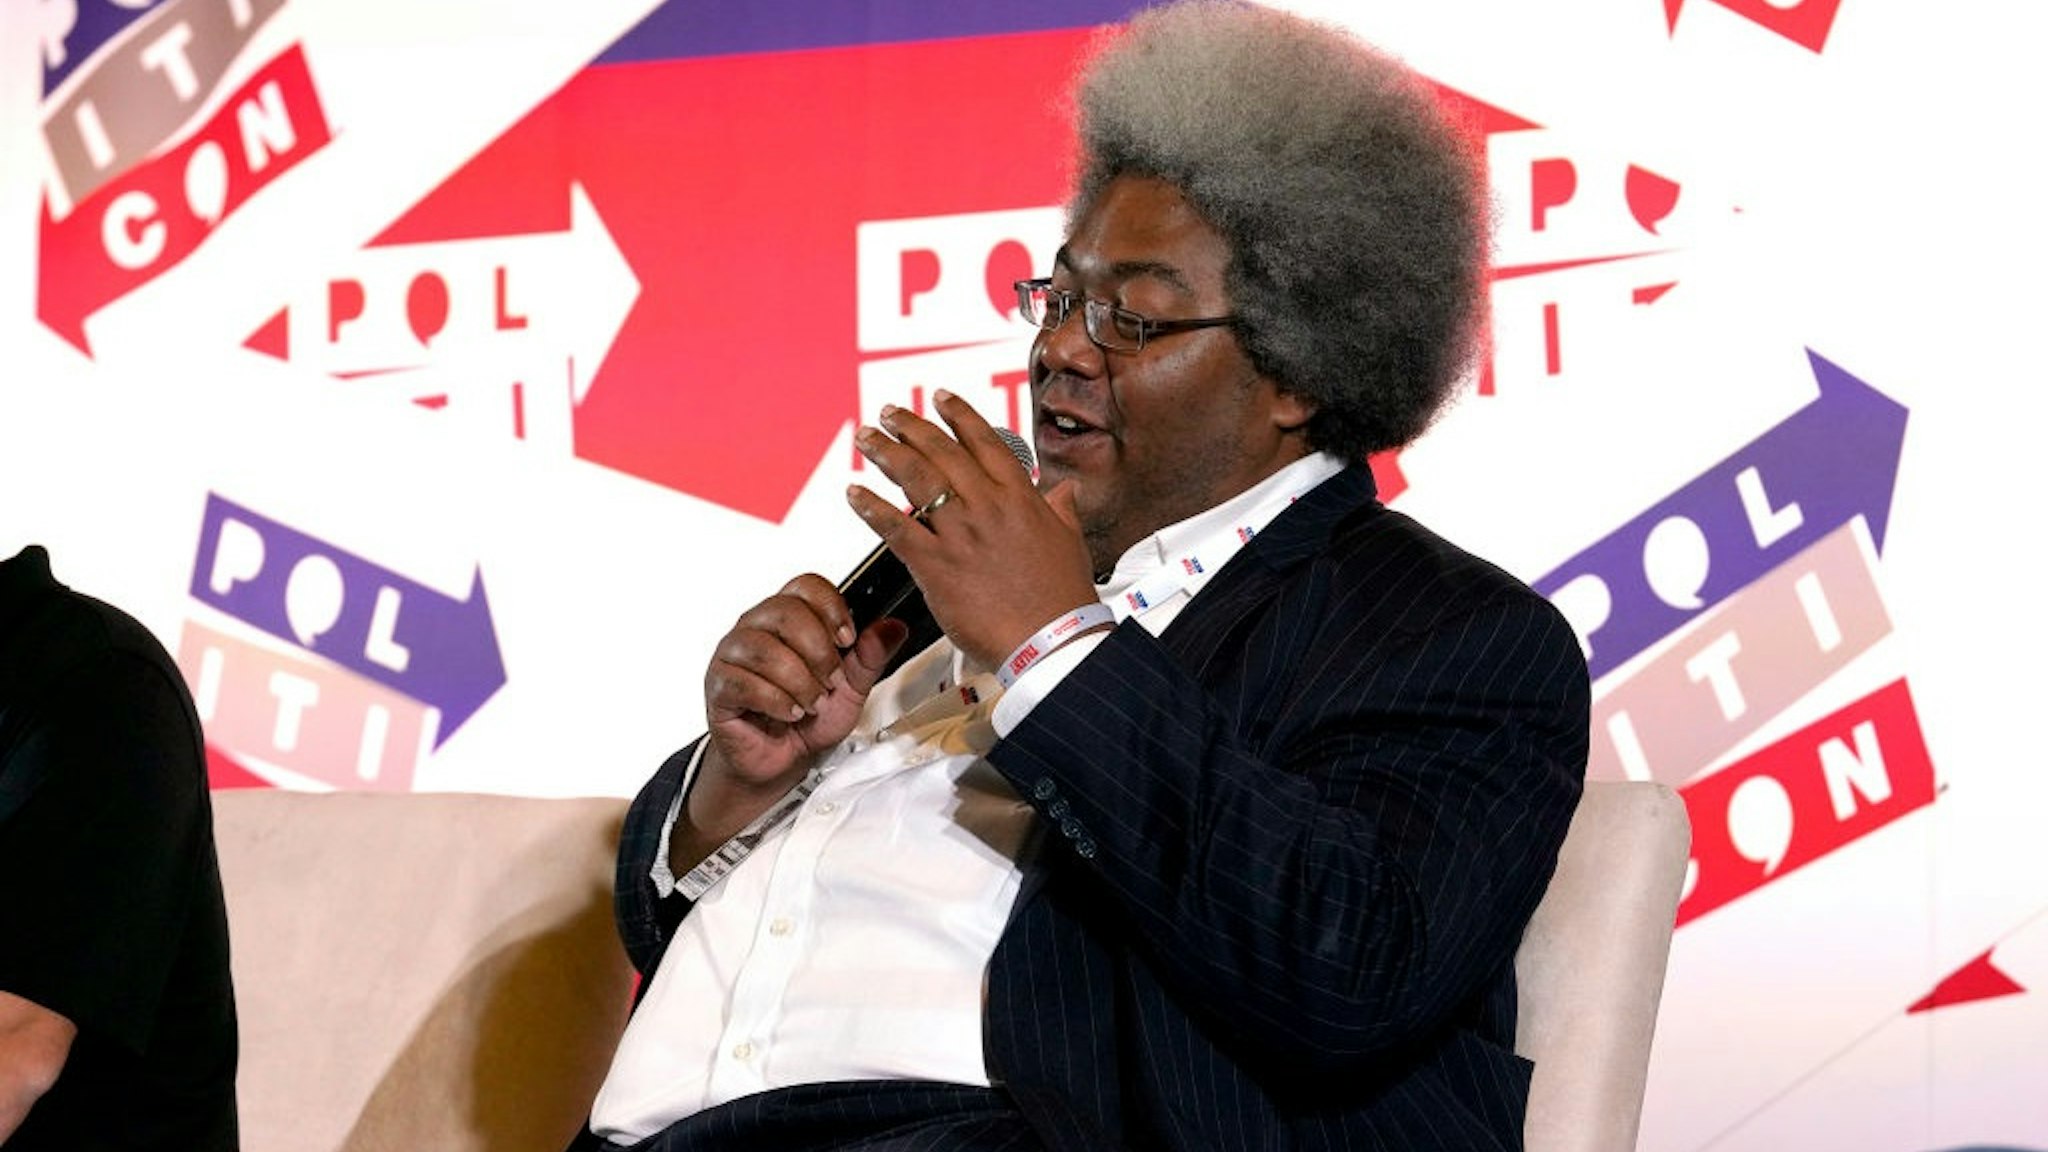 NASHVILLE, TENNESSEE - OCTOBER 26: Elie Mystal speaks onstage during the 2019 Politicon at Music City Center on October 26, 2019 in Nashville, Tennessee.